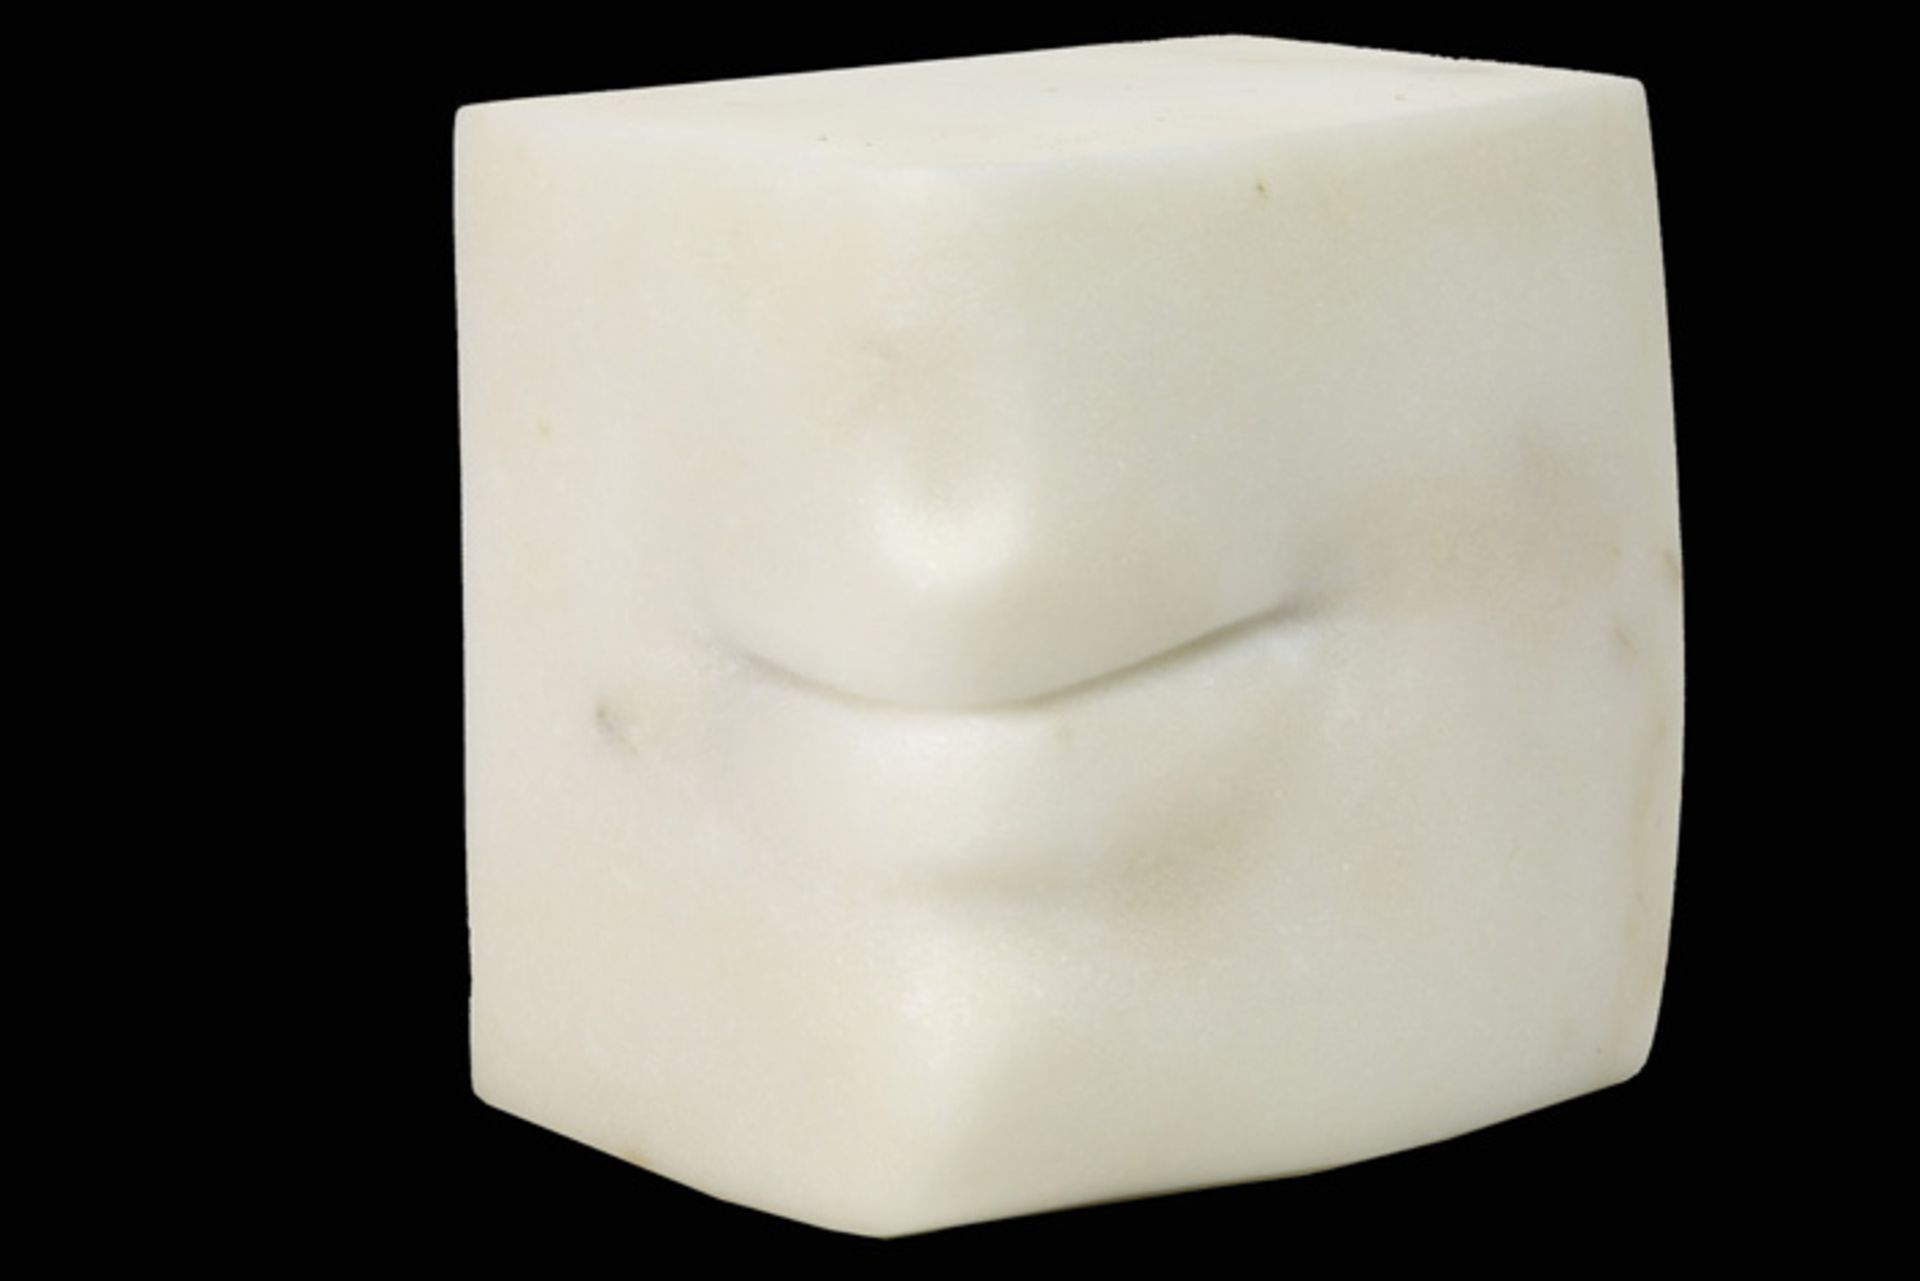 20th Cent. Belgian Jan Dries "Smile" sculpture in marble - signed and dated 1968 DRIES JAN (1925 - - Image 3 of 4